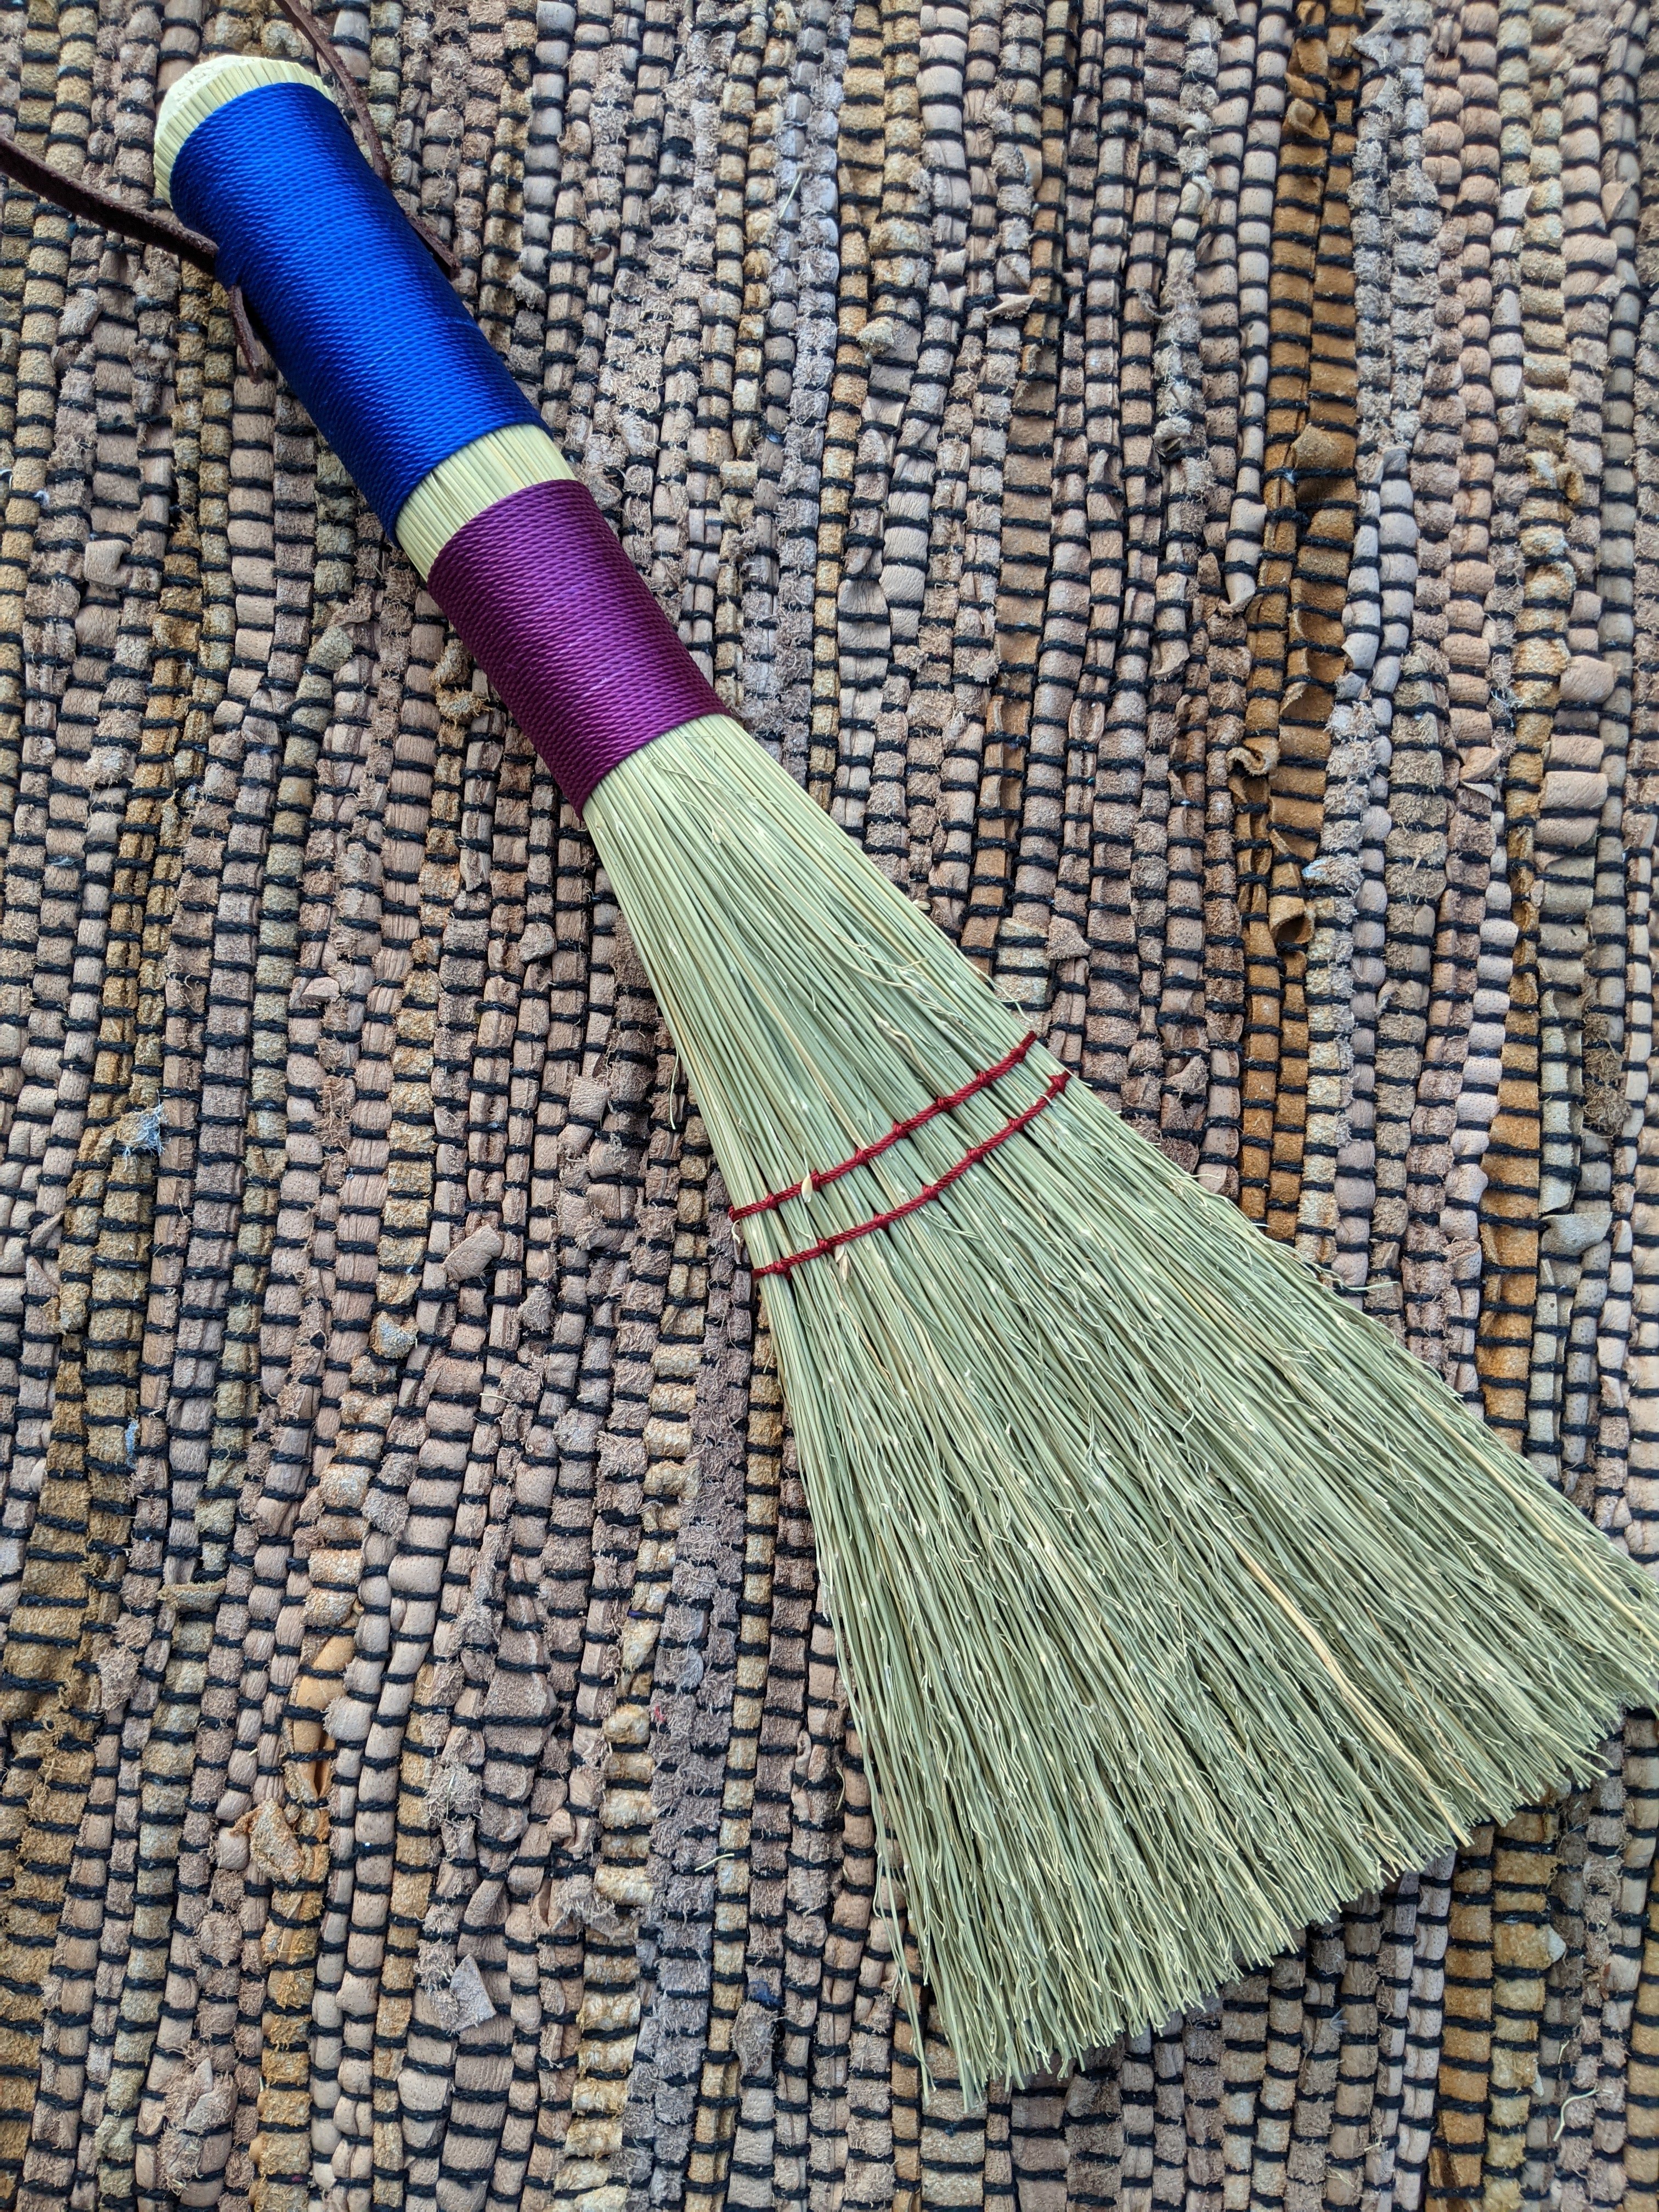 Stitched Hand Whisk - Purple and Royal Blue with two rows of Red Stitching